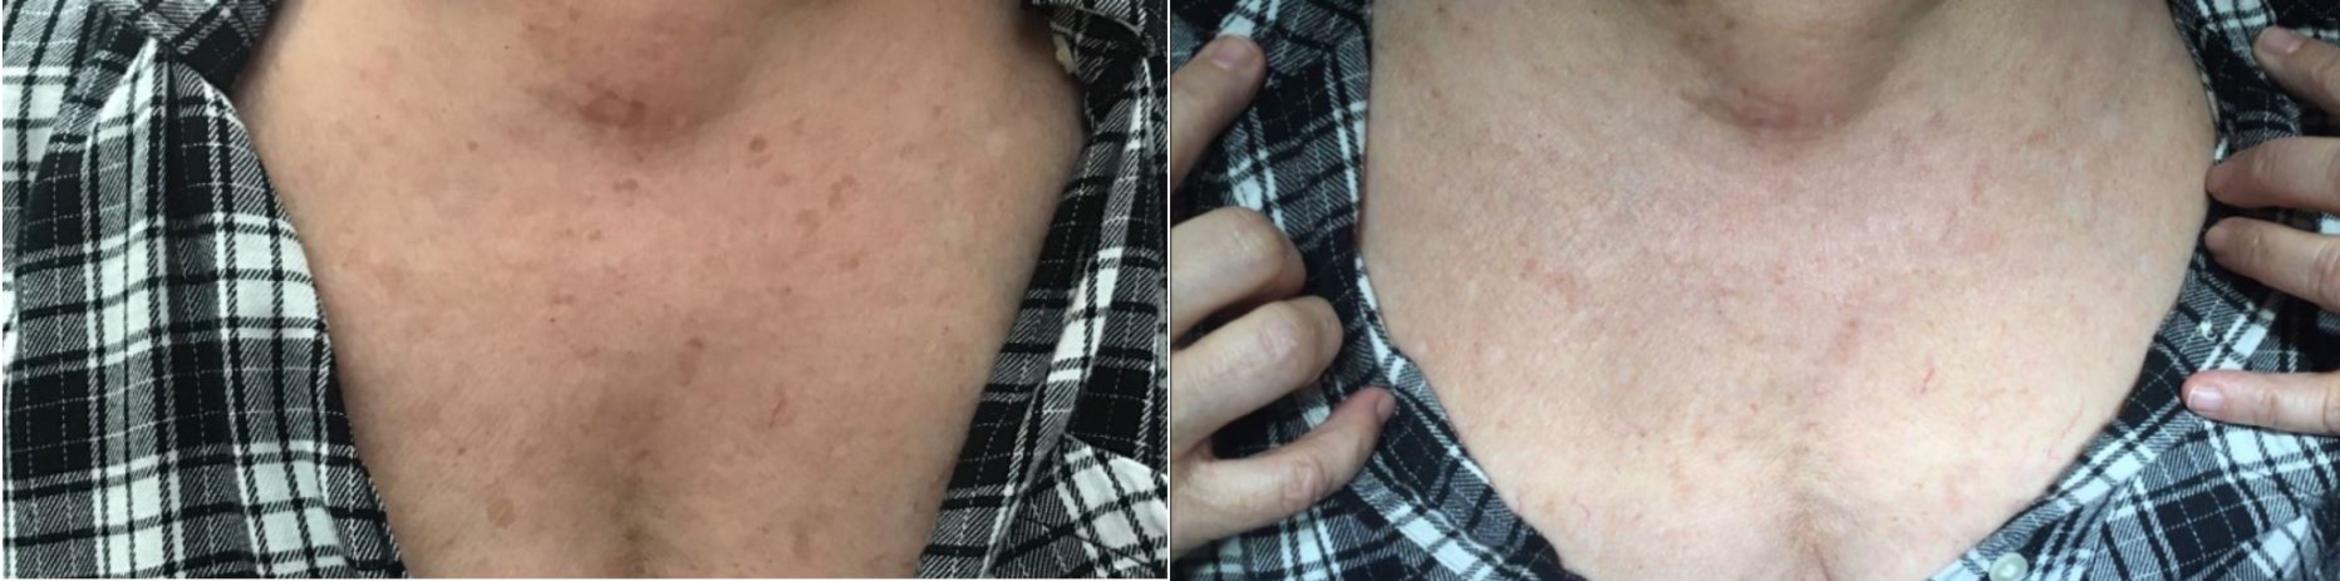 Laser Sunspot Removal Before & After Photo | New Jersey & Pennsylvania,  | The Derm Group